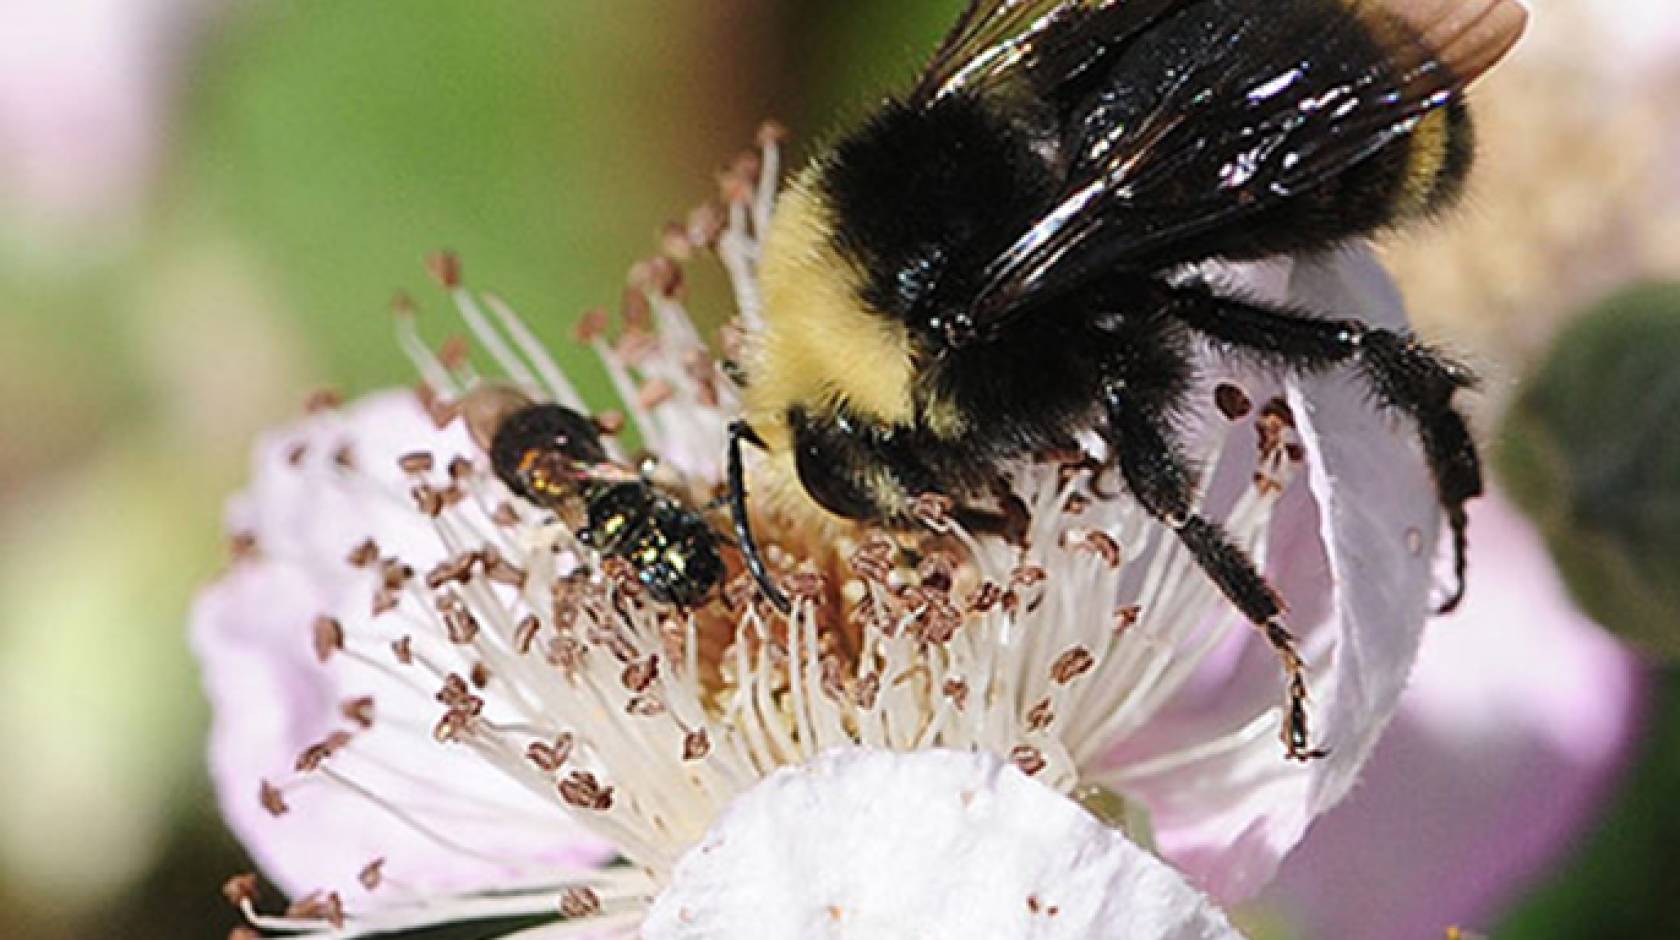 The numbers of wild pollinators like this yellow-faced bumblebee have declined in areas where the need for crop pollination is high. 